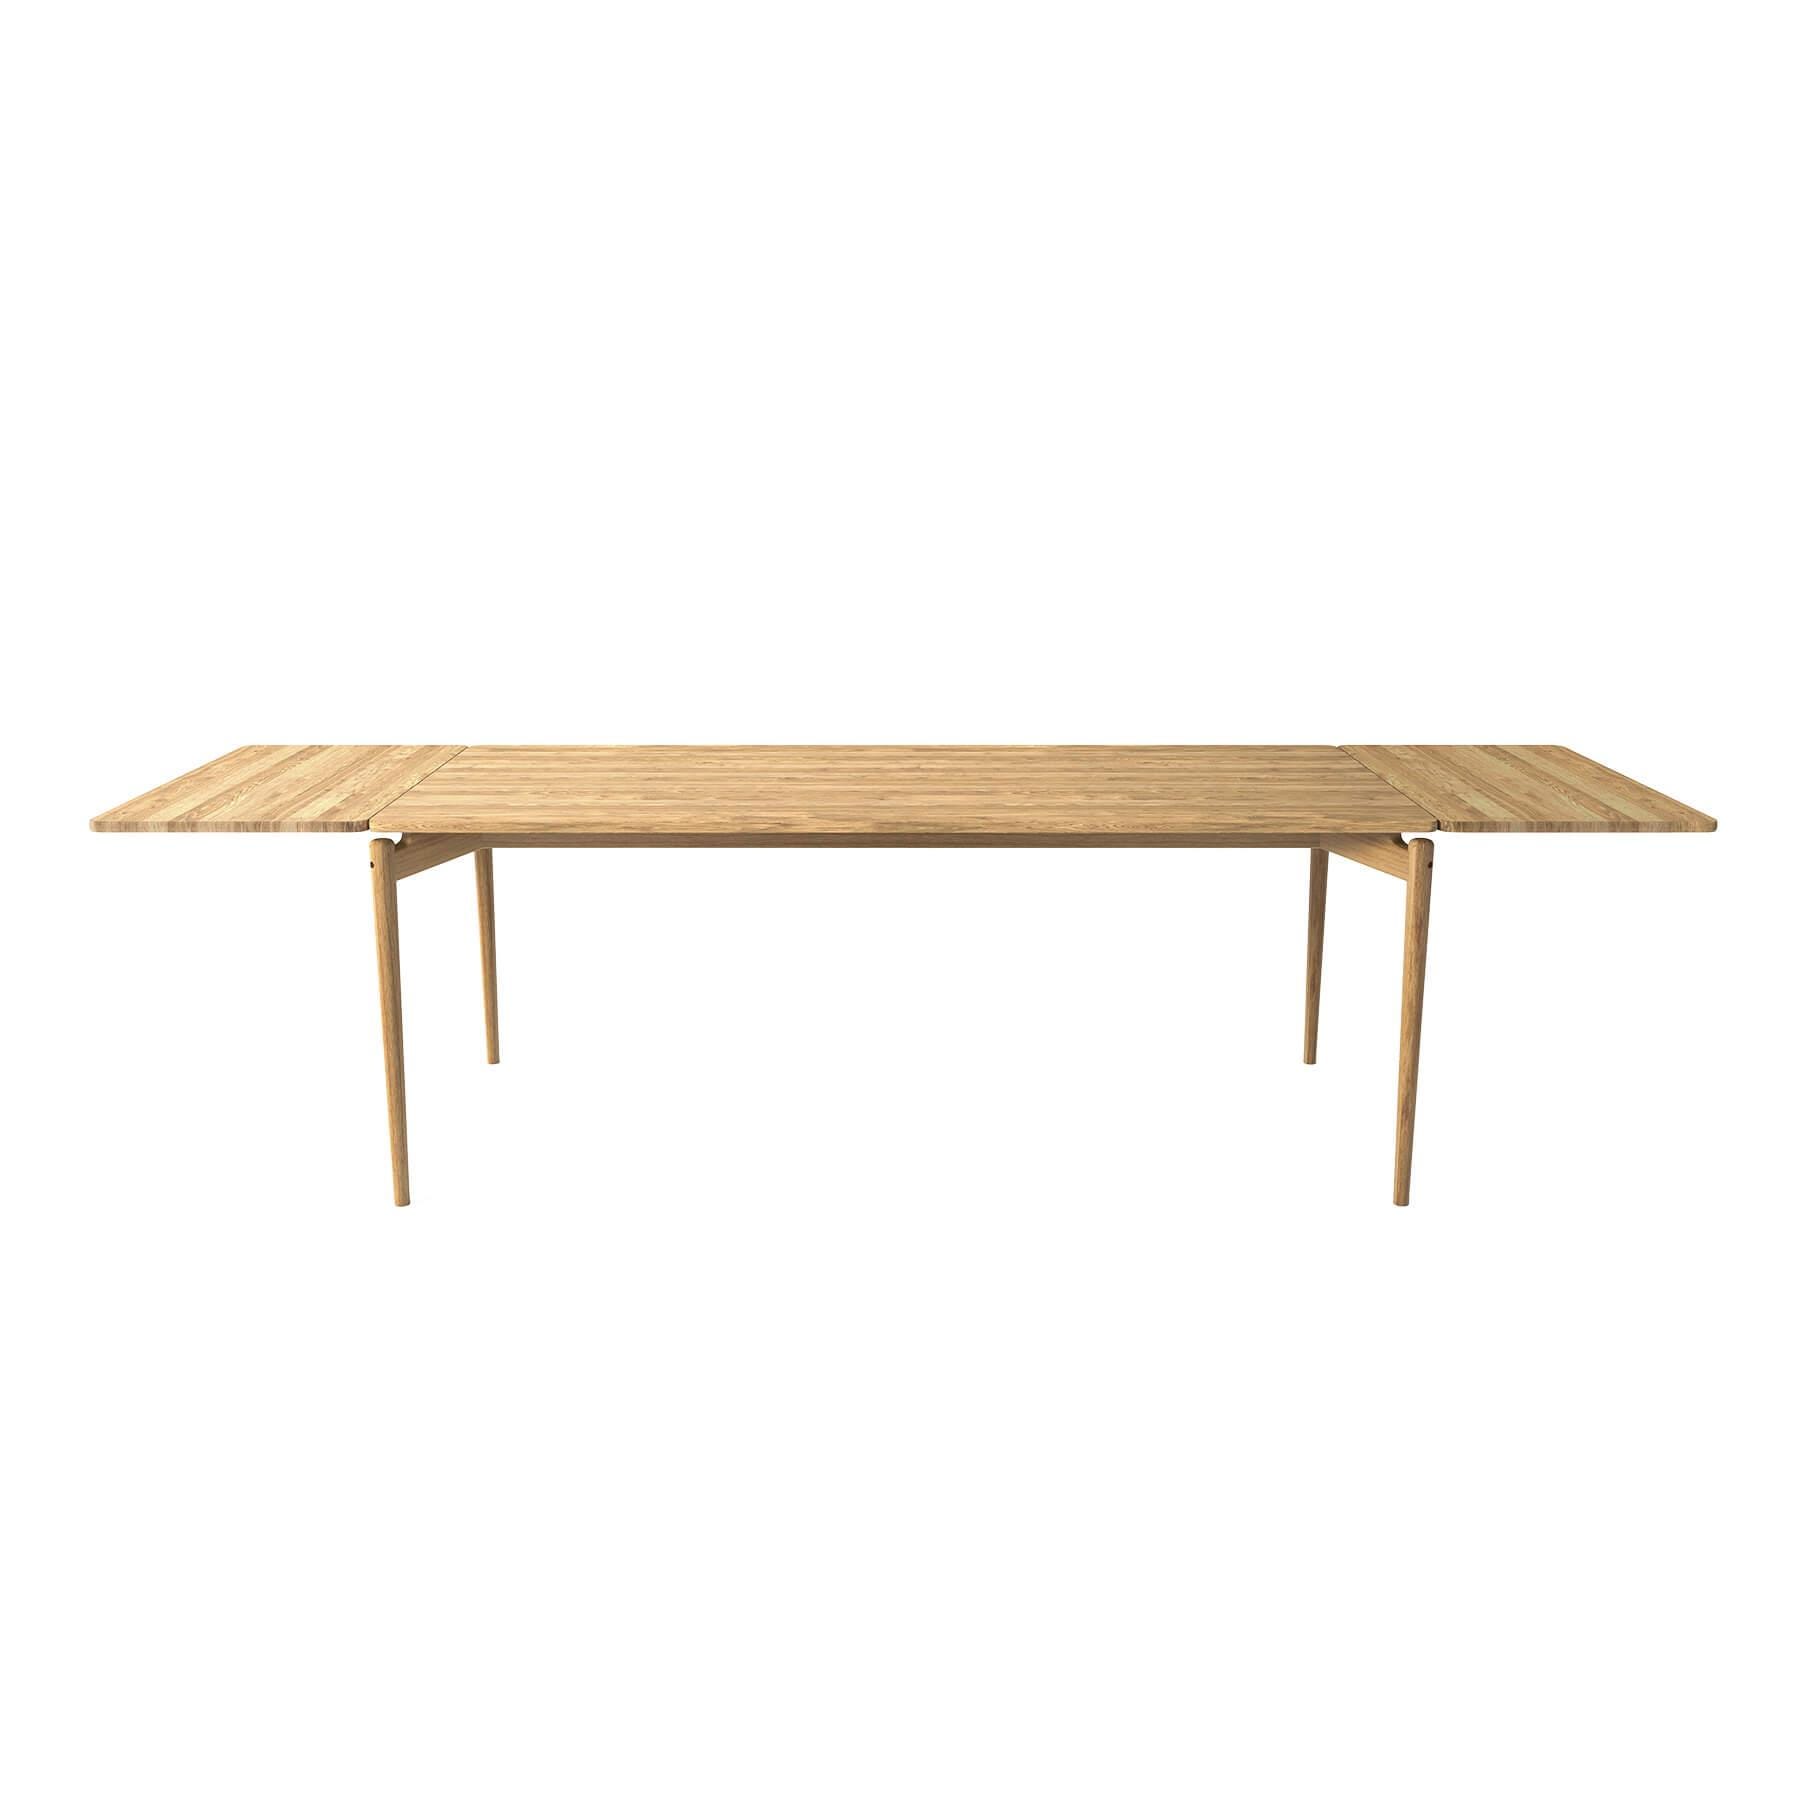 Bruunmunch Pure Dining Table 190cm Oak White Oil 2 Matching Plates Light Wood Designer Furniture From Holloways Of Ludlow